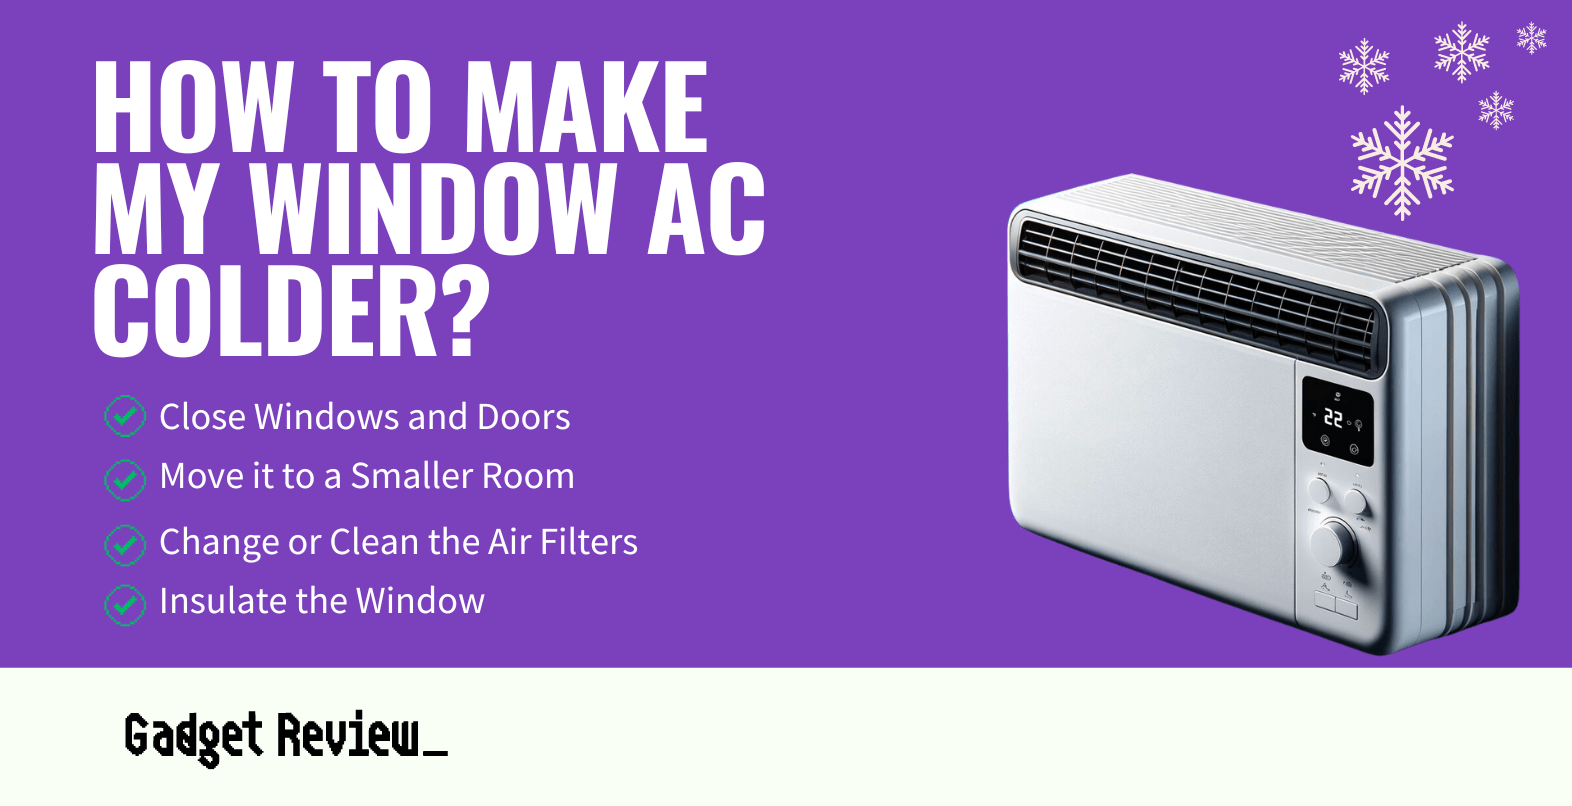 how to make my window ac colder guide